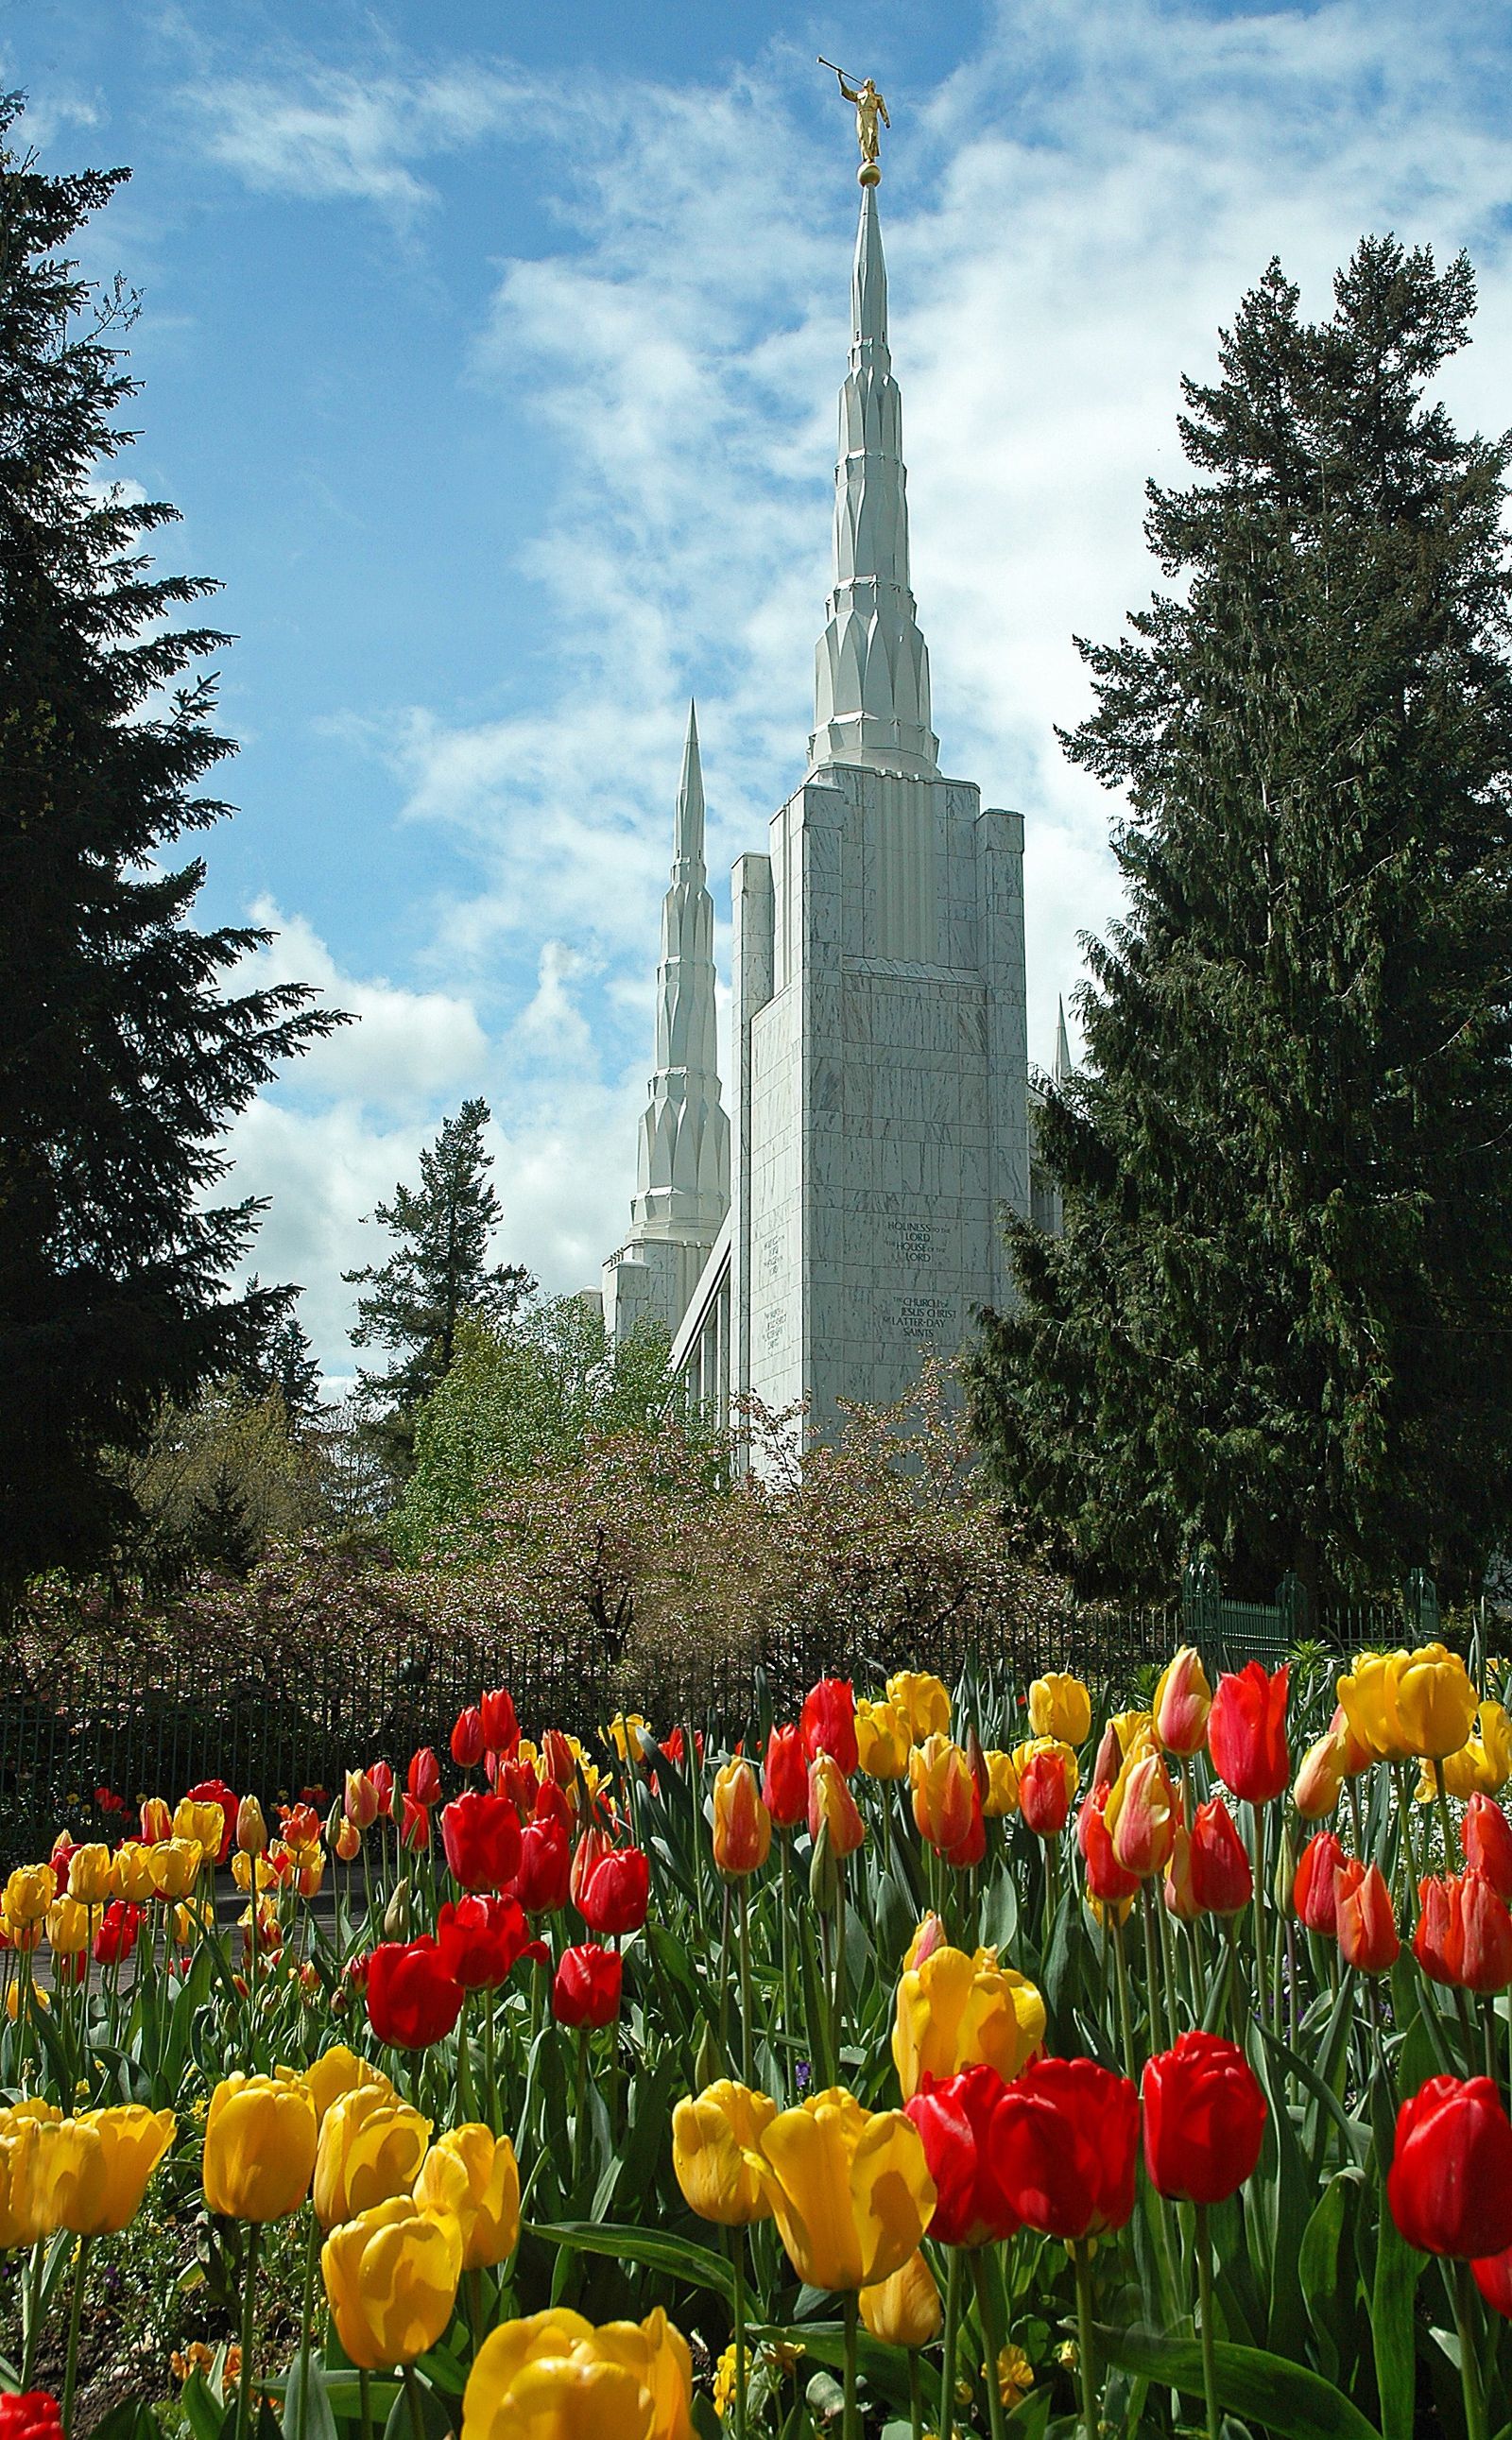 The Portland Oregon Temple grounds, with tulips blooming in the foreground and trees on either side.